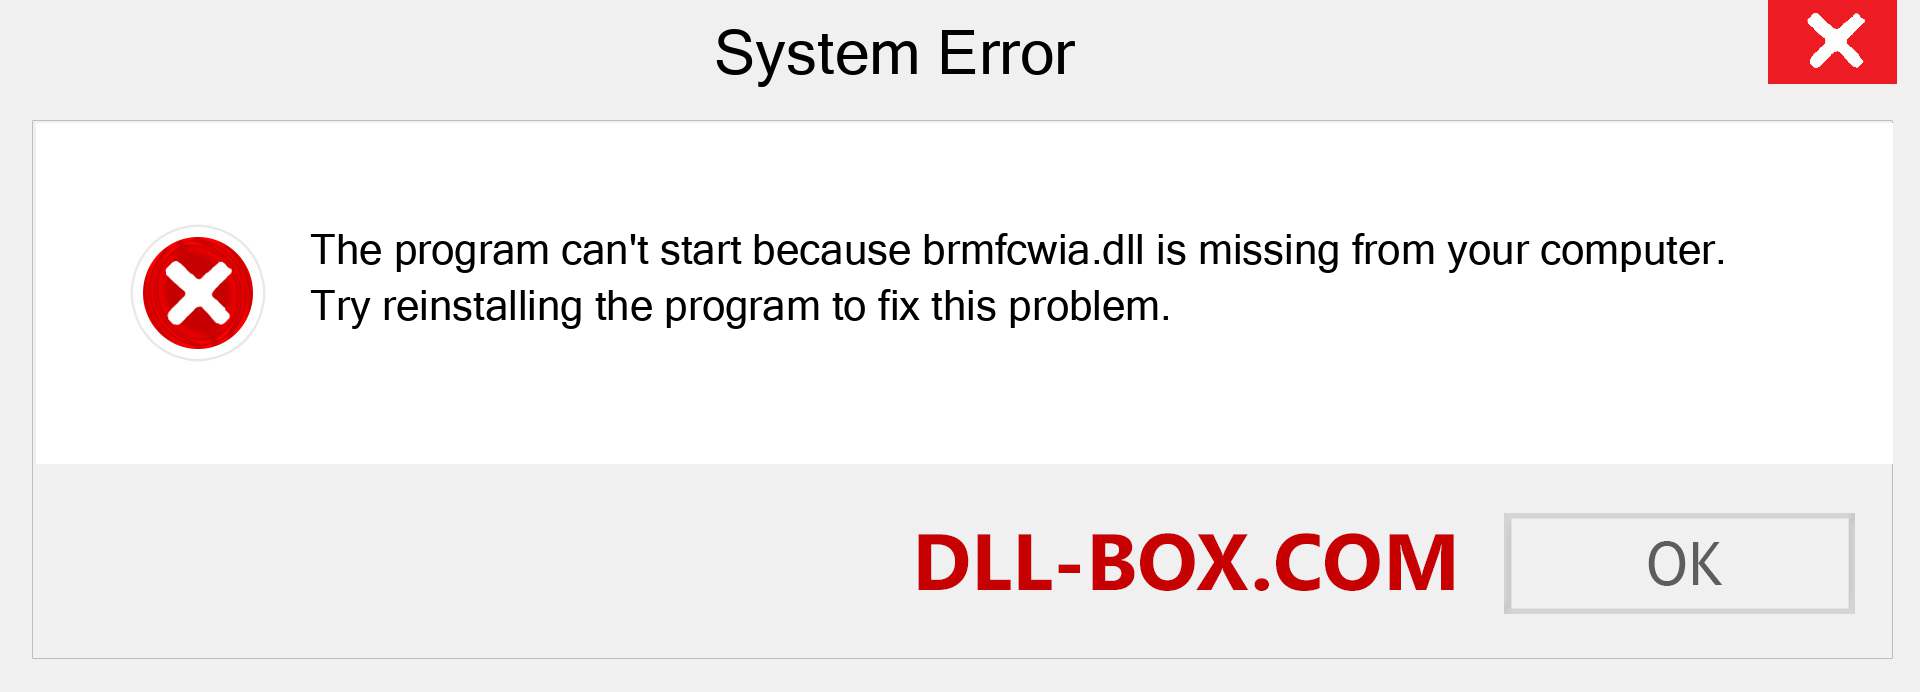  brmfcwia.dll file is missing?. Download for Windows 7, 8, 10 - Fix  brmfcwia dll Missing Error on Windows, photos, images